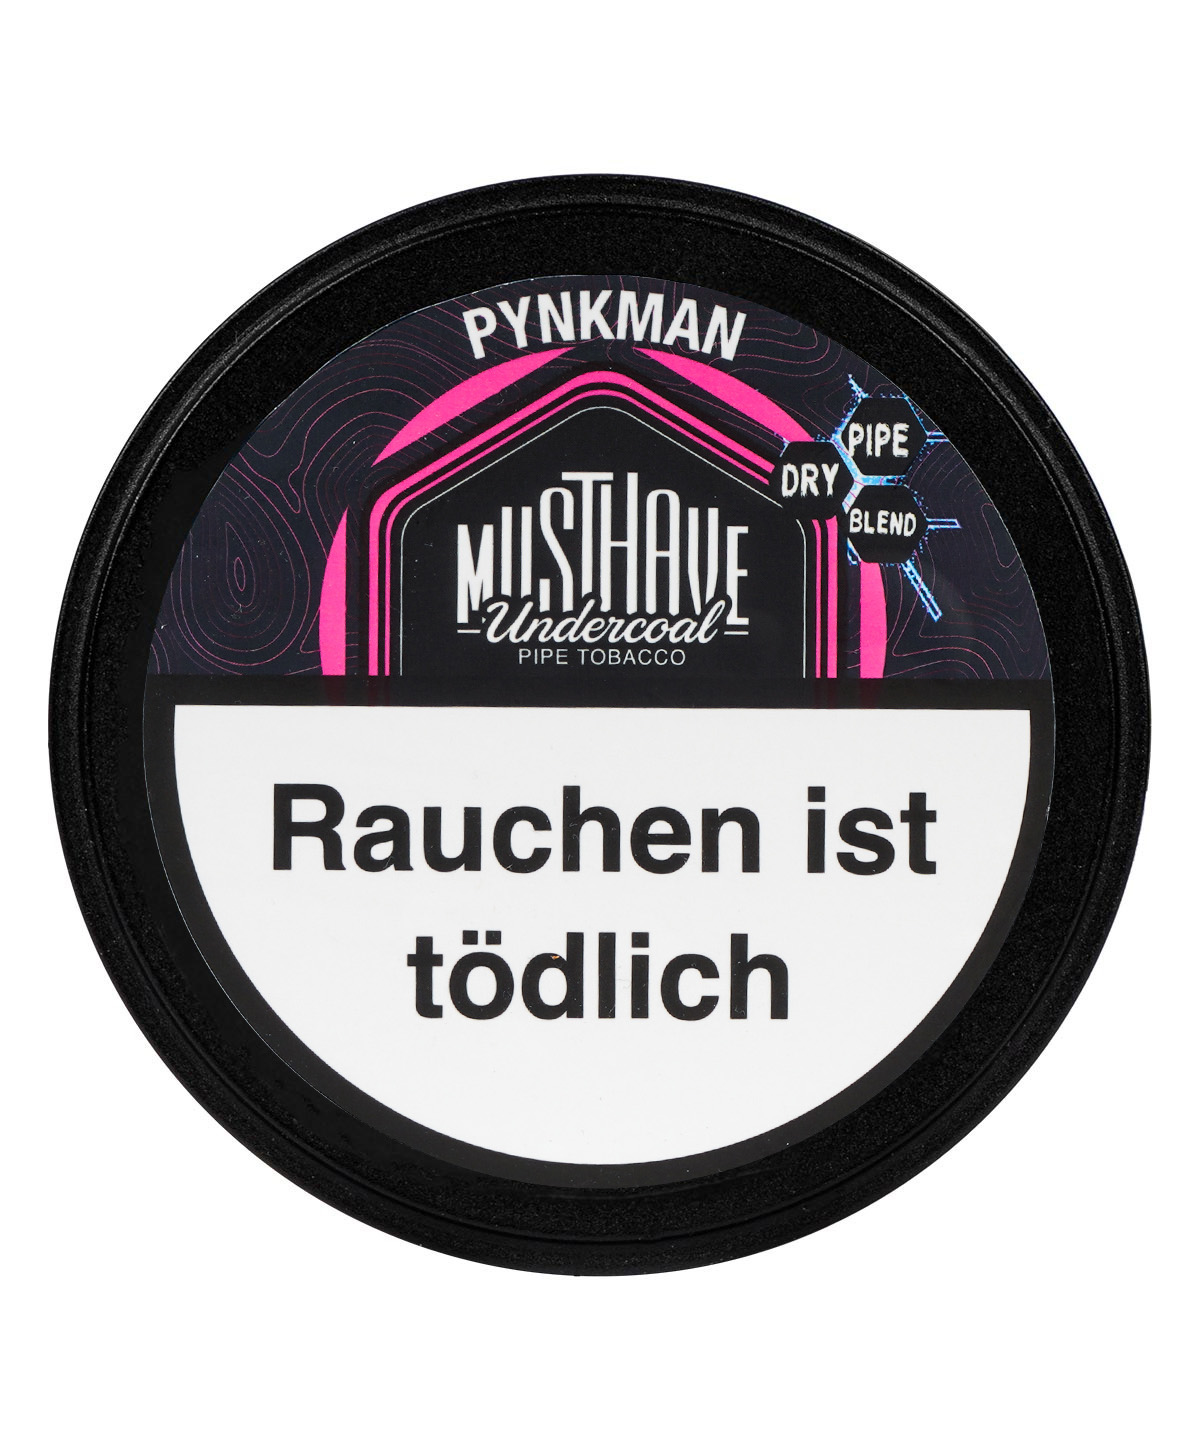 Musthave Pynkman Dry Base 70g